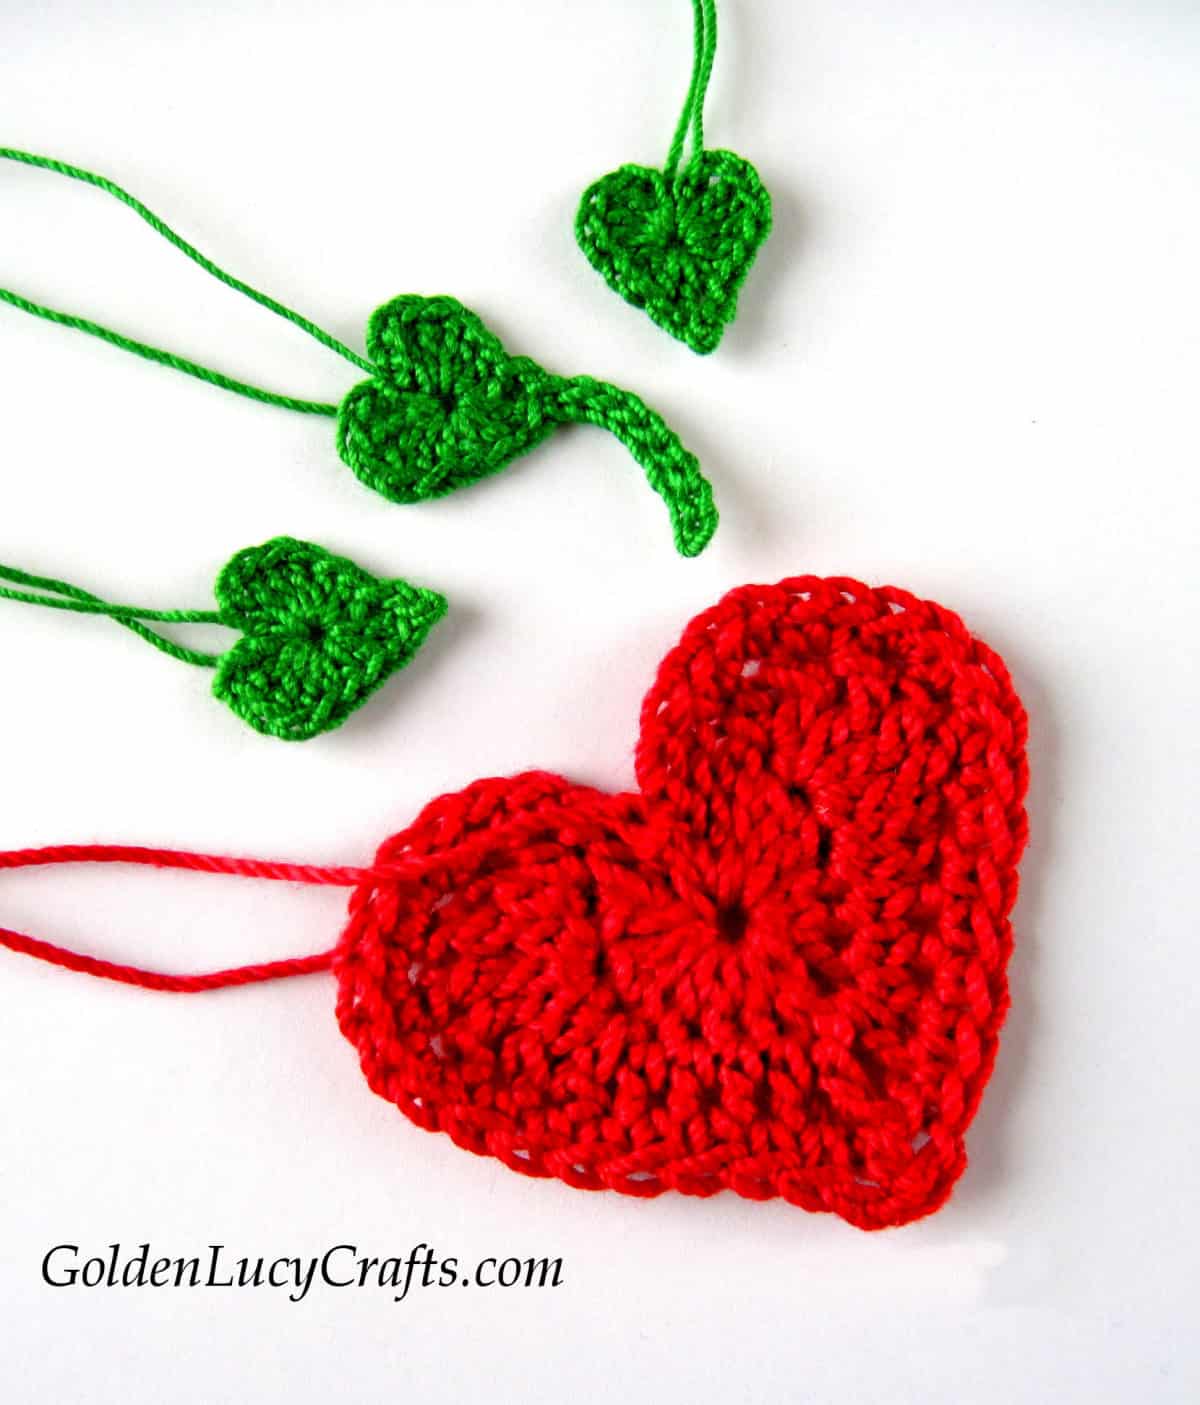 Crocheted one large red heart and three small green hearts, elements of strawberry applique.